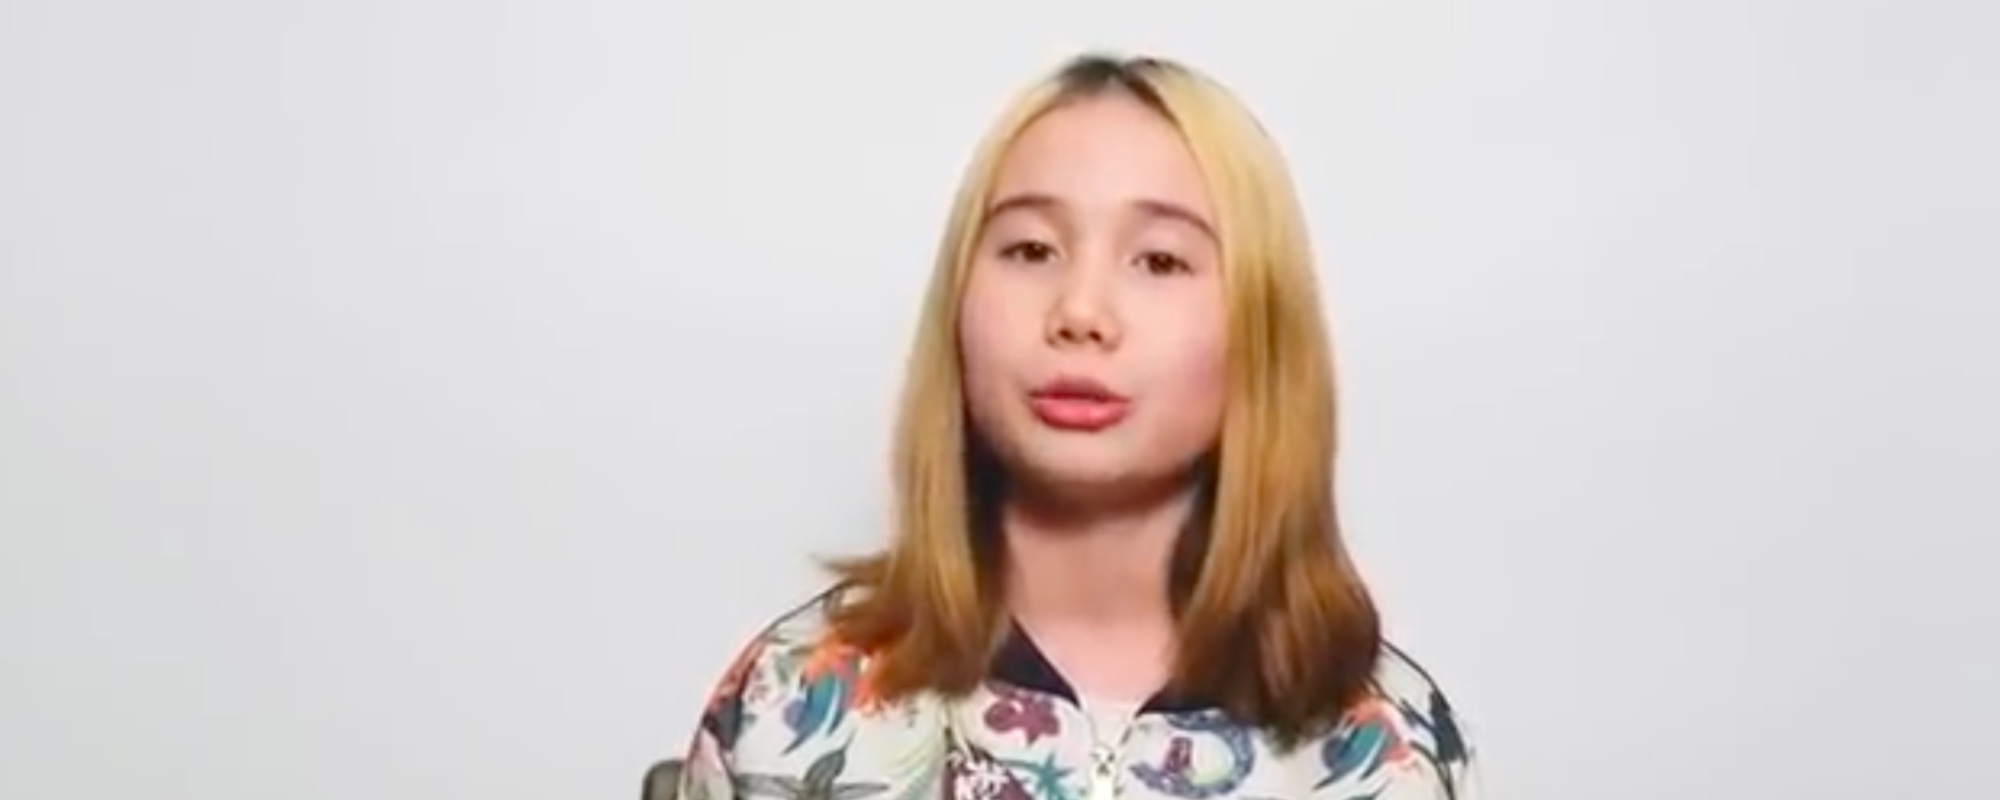 Lil Tay Refutes Death Announcement, Confirms She is Alive